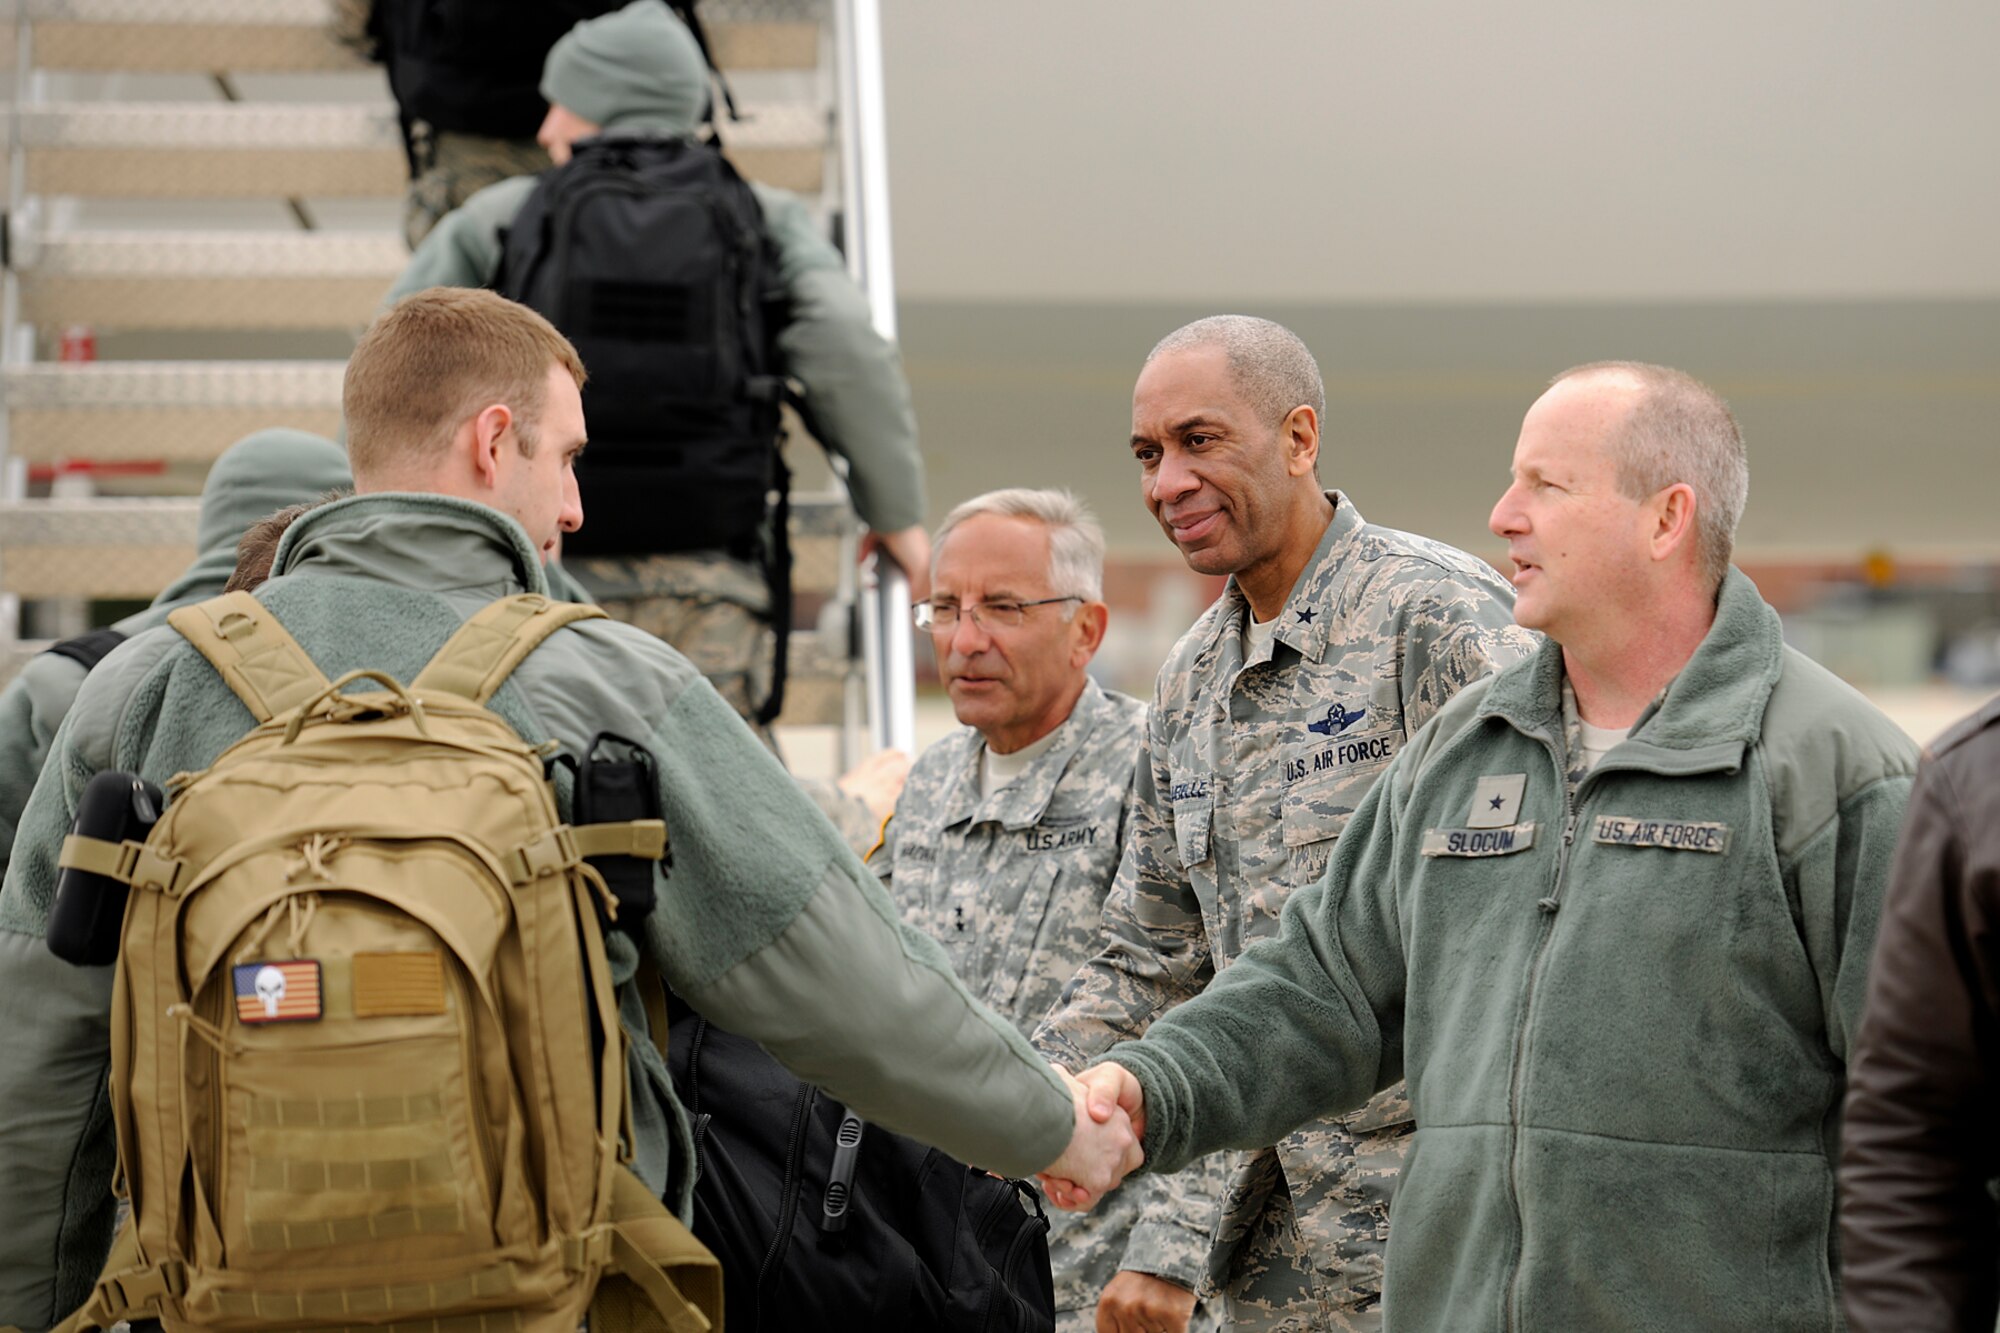 150410-Z-EZ686-027 -- Senior leaders of the Michigan National Guard shake hands with deploying members of the 127th Wing at Selfridge Air National Guard Base, Mich., April 10, 2015. Sending off the Airmen are Major Gen. Gregory J. Vadnais, adjutant general of Michigan; Brig. Gen. Leonard W. Isabelle Jr., commander of the Michigan Air National Guard; and Brig. Gen. John D. Slocum, commander of the 127th Wing. (U.S. Air National Guard photo by Master Sgt. David Kujawa)